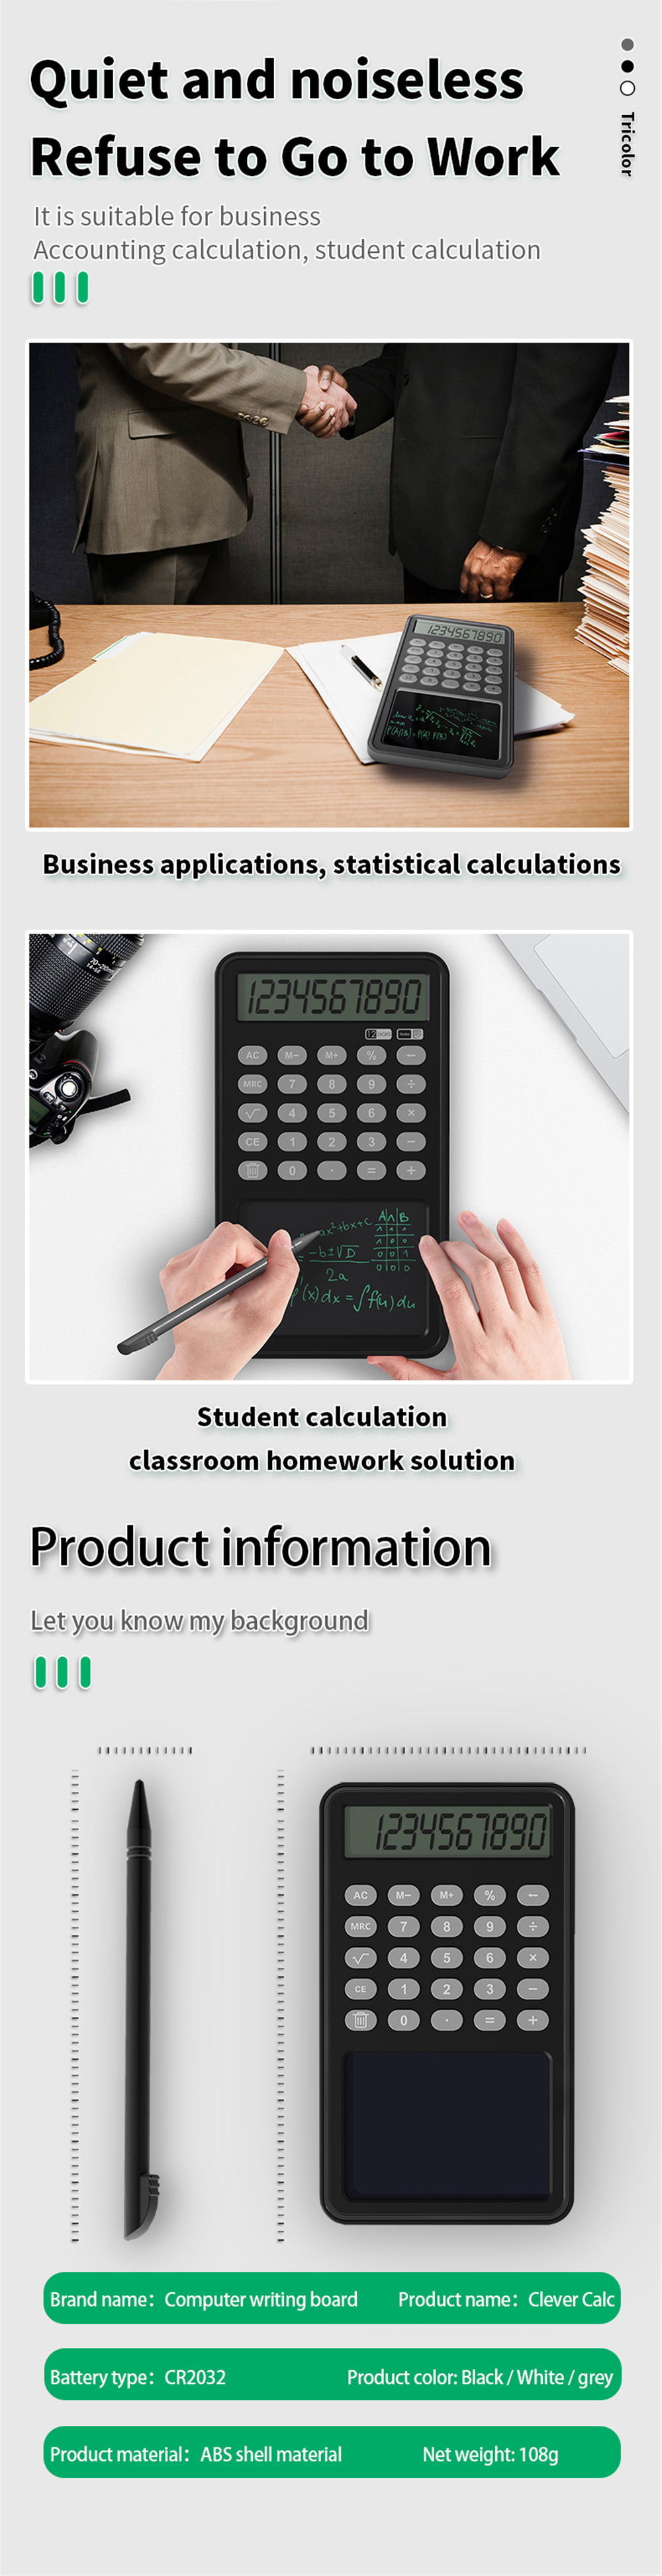 12-Digit-Calculator-with-LCD-Writing-Board-Left-Hand-Portable-Drawing-Draft-Board-Office-Finance-Cal-1832039-4